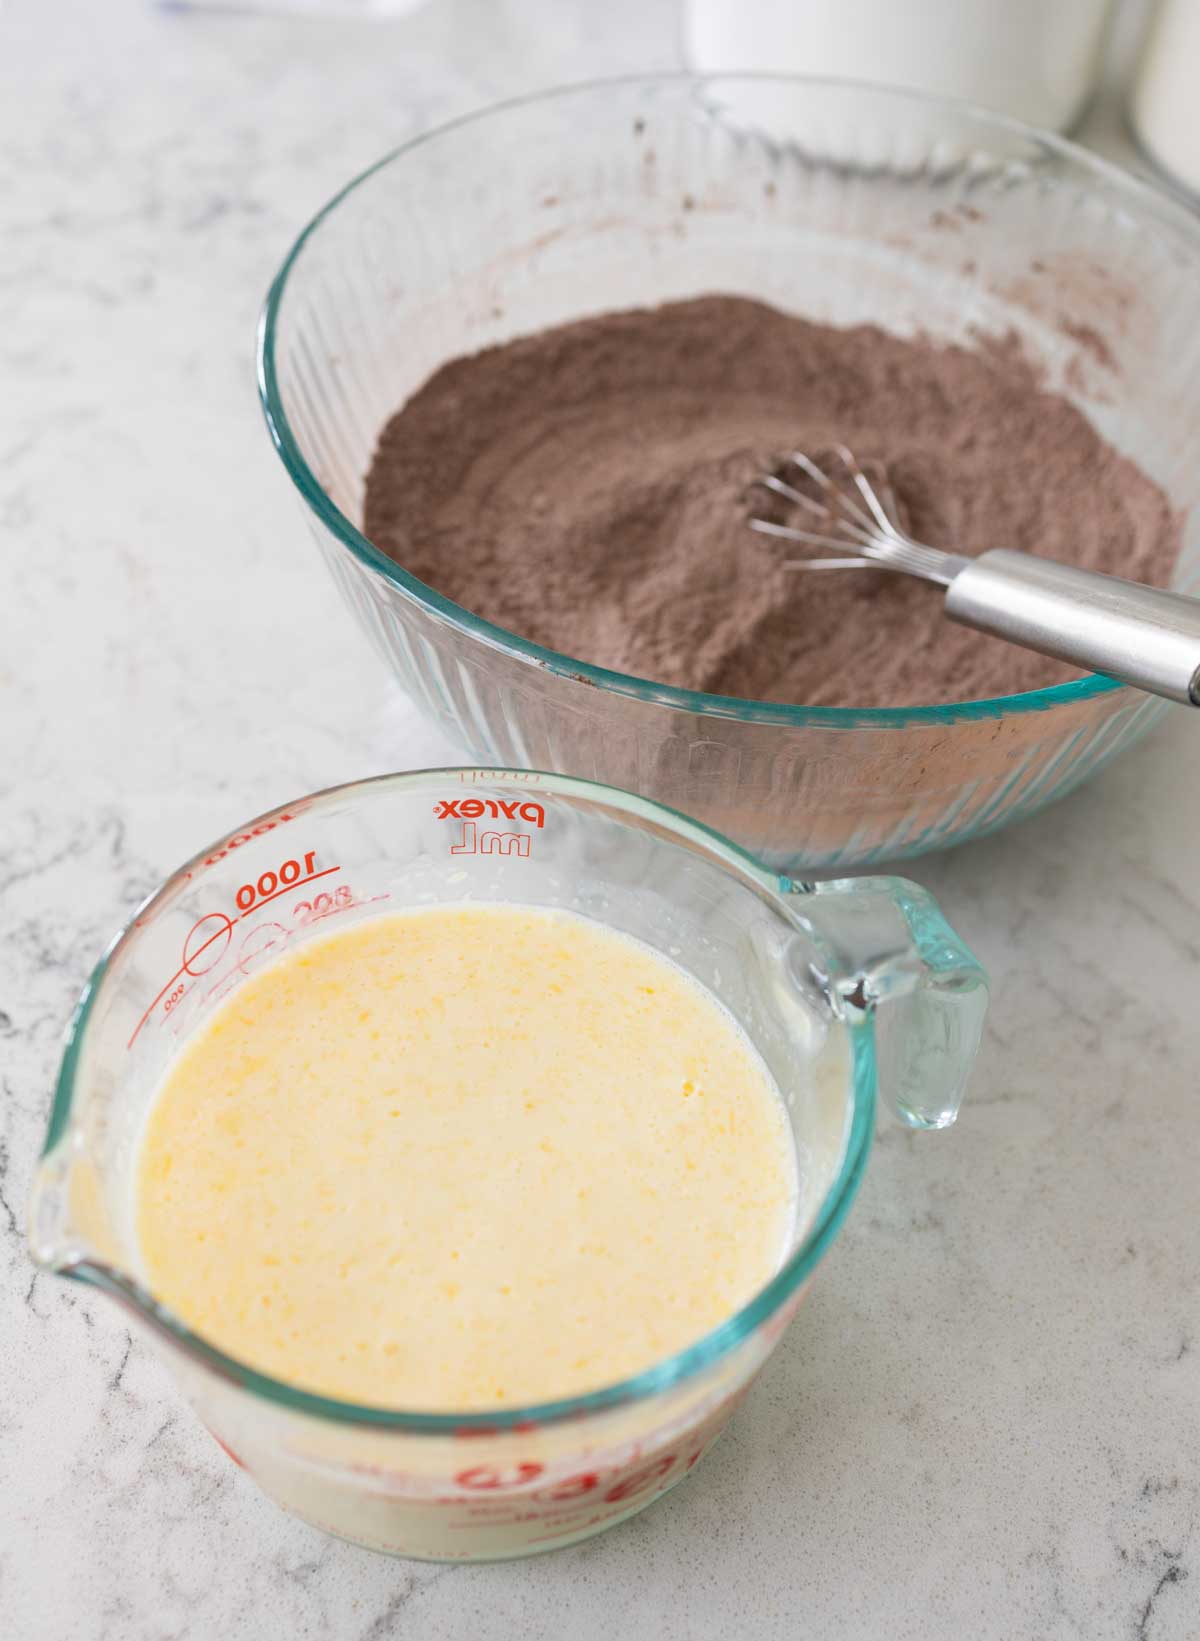 The whisked bowl of buttermilk and eggs sits next to the bowl of dry chocolate powder and flour.